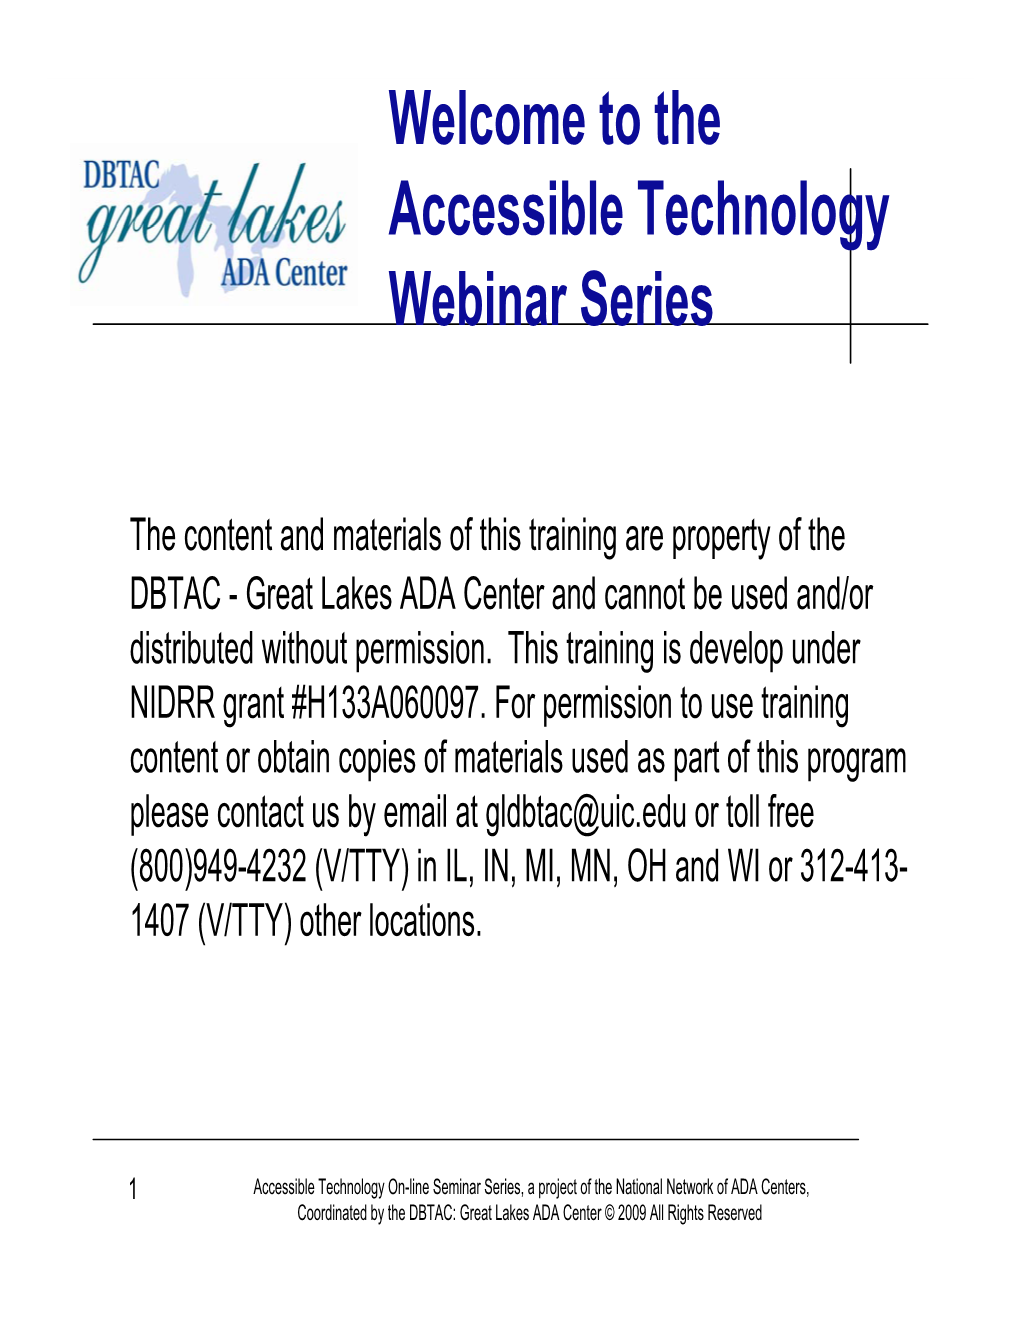 Accessible Technology On-Line Seminar Series